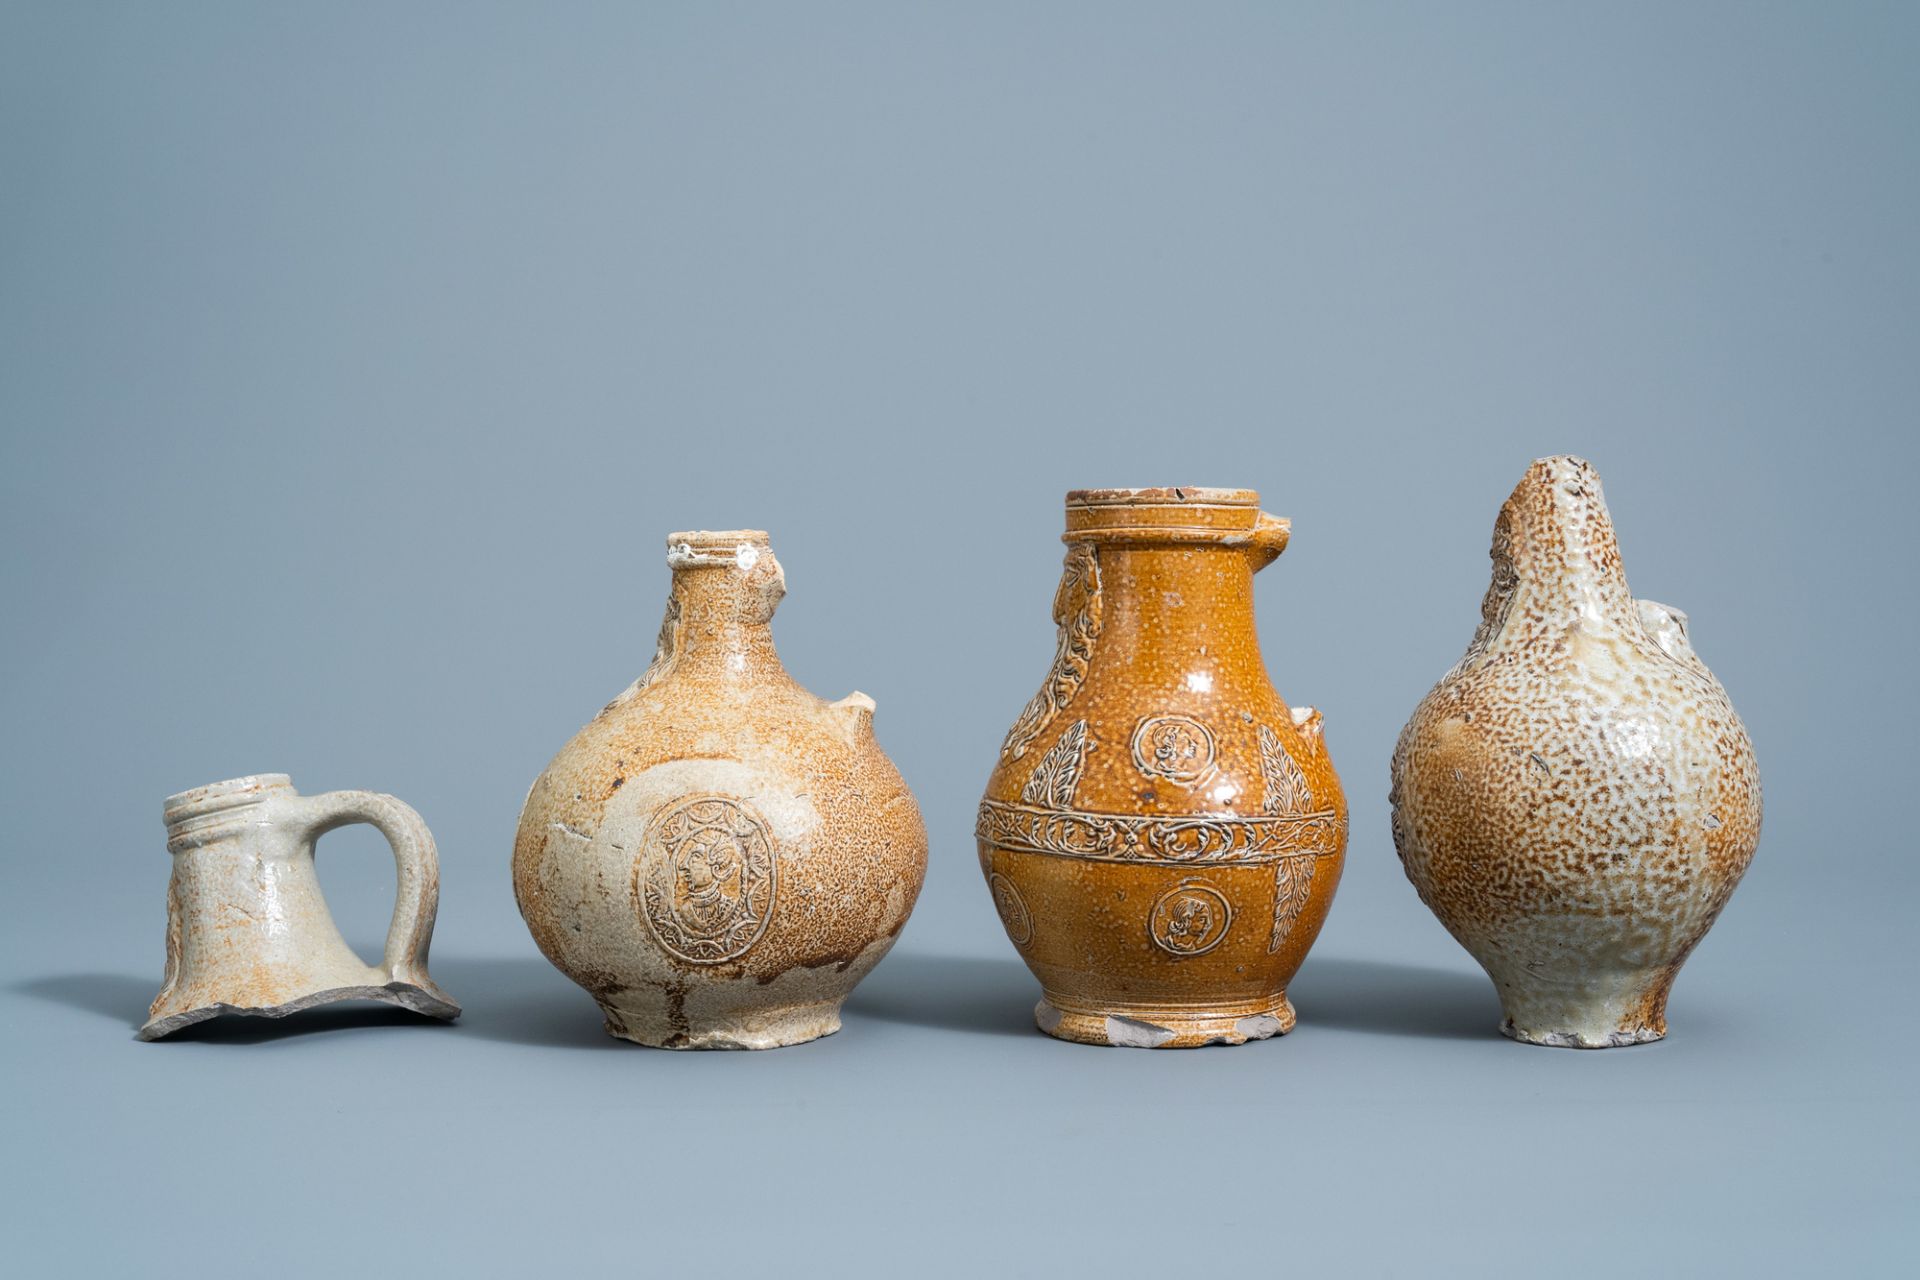 Three German stoneware bellarmine jugs and a neck fragment, 16th/17th C. - Image 4 of 8